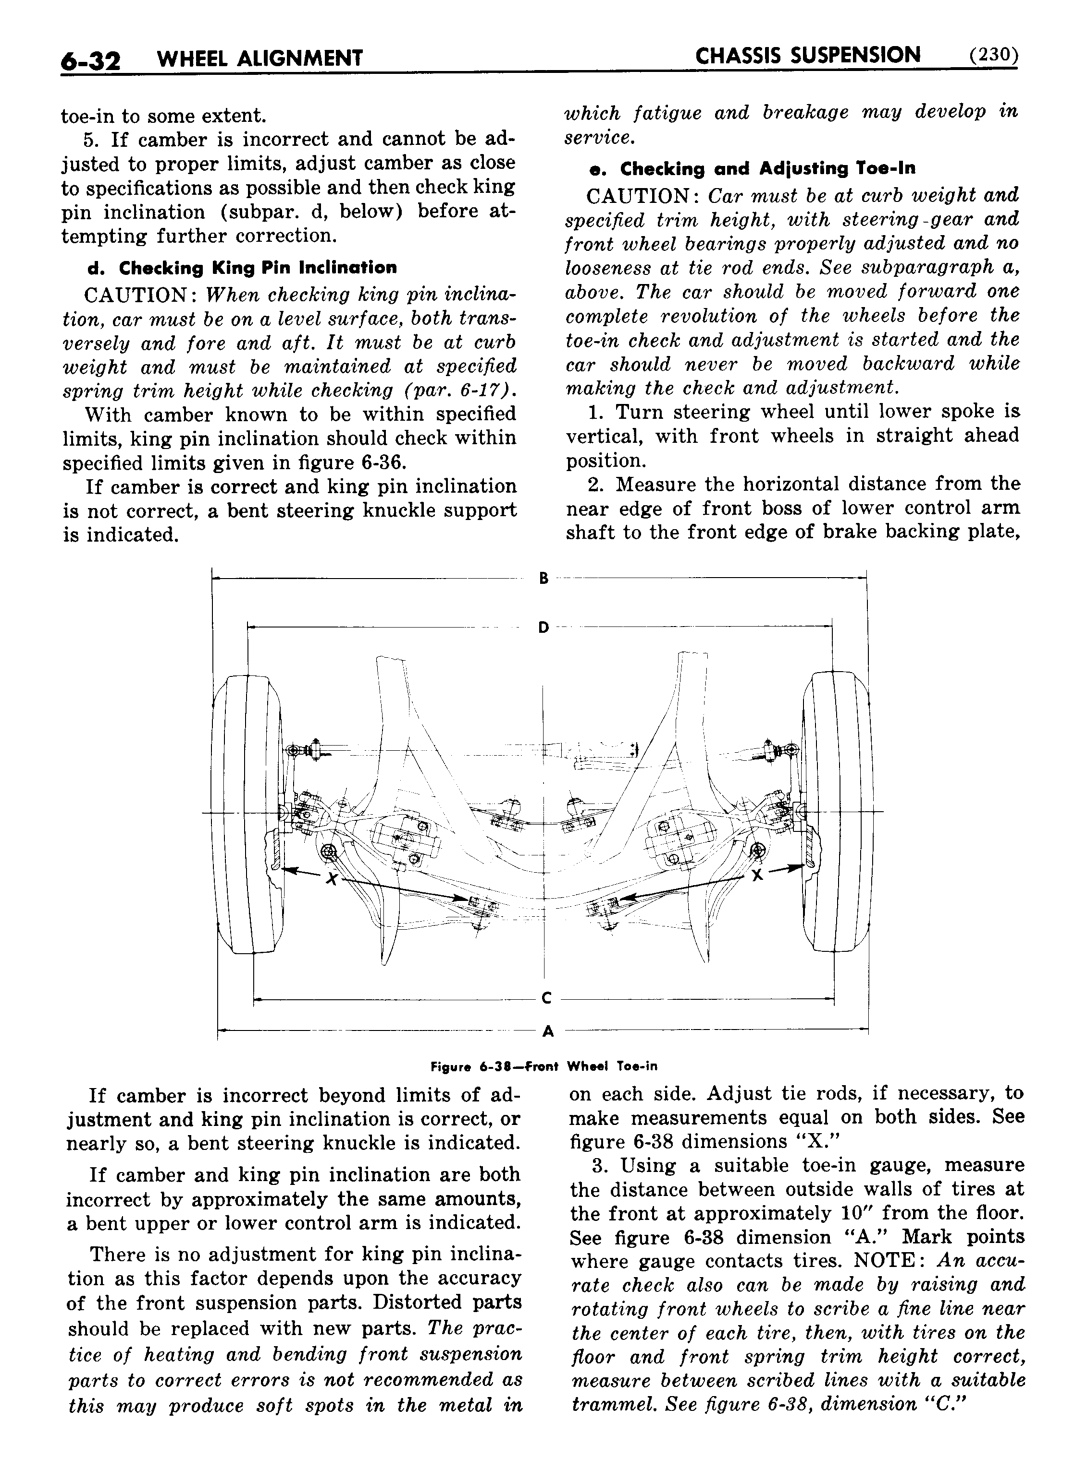 n_07 1948 Buick Shop Manual - Chassis Suspension-032-032.jpg